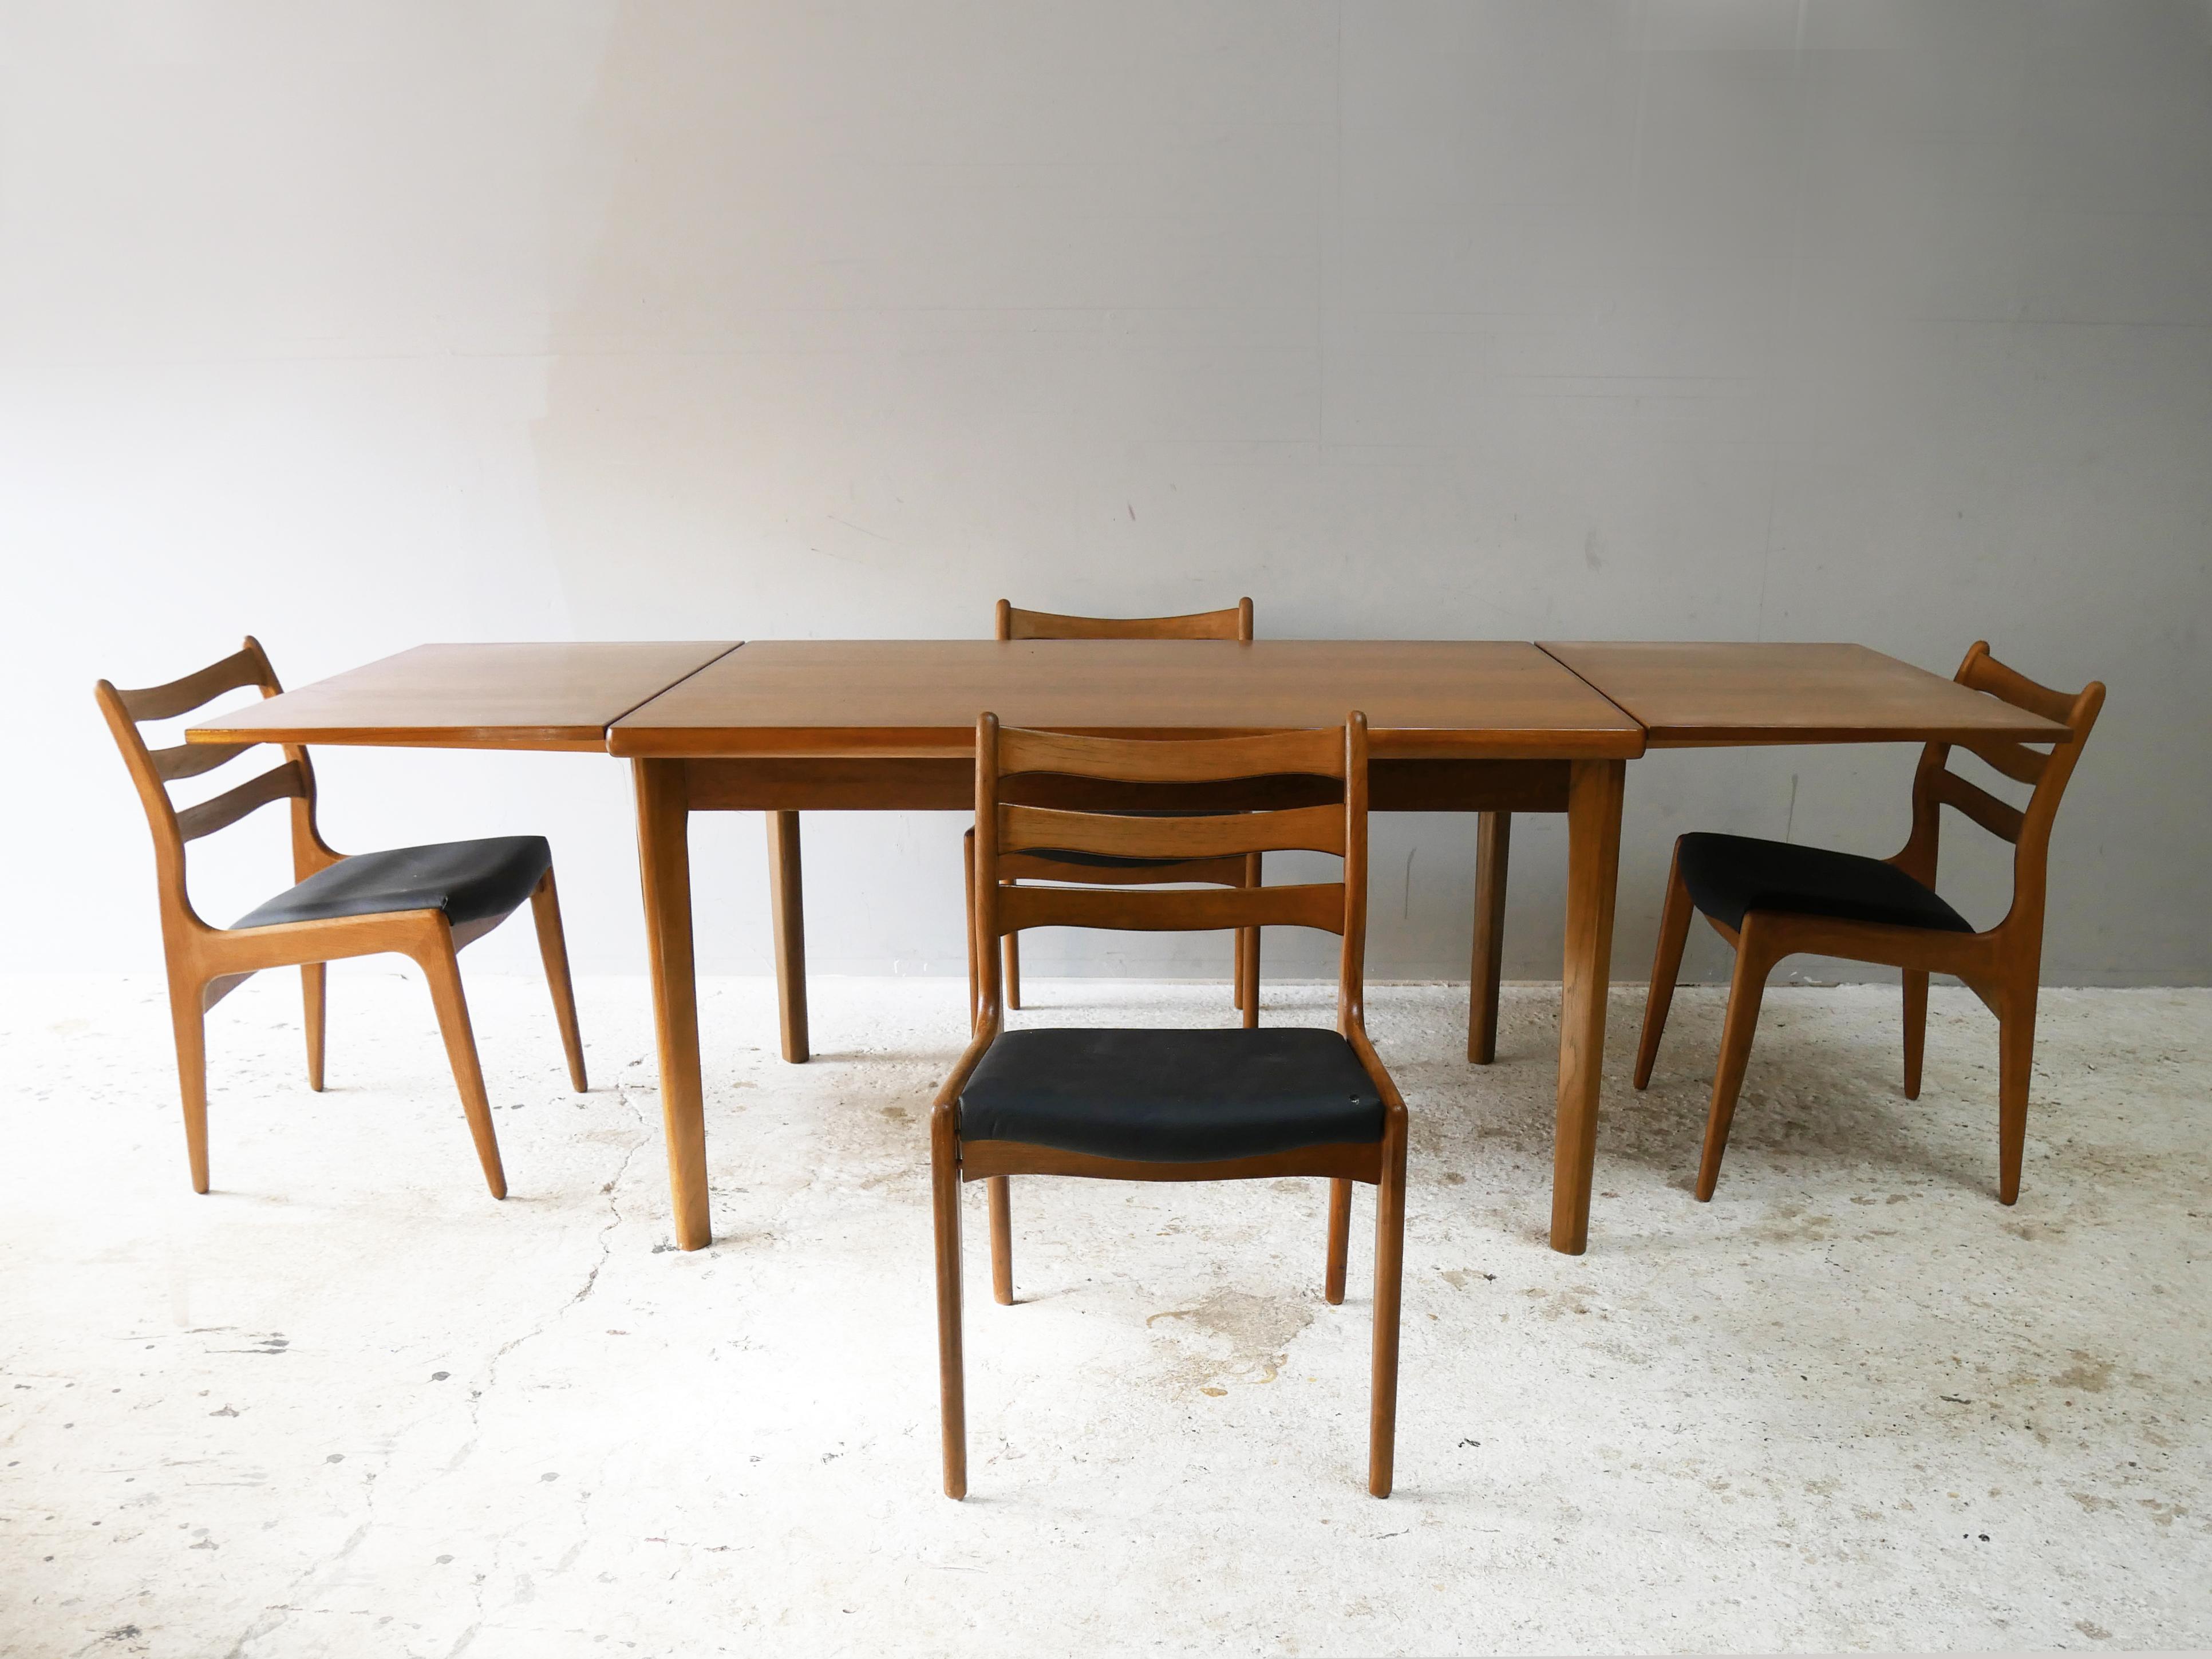 A large draw leaf dining table and 4 dining chairs produced by AM Mobler Ansager Møbler) in the 1960’s.

The depth of the table is still very slim even when unextended. Clever design allows the extension leaves to sit in a space under the table